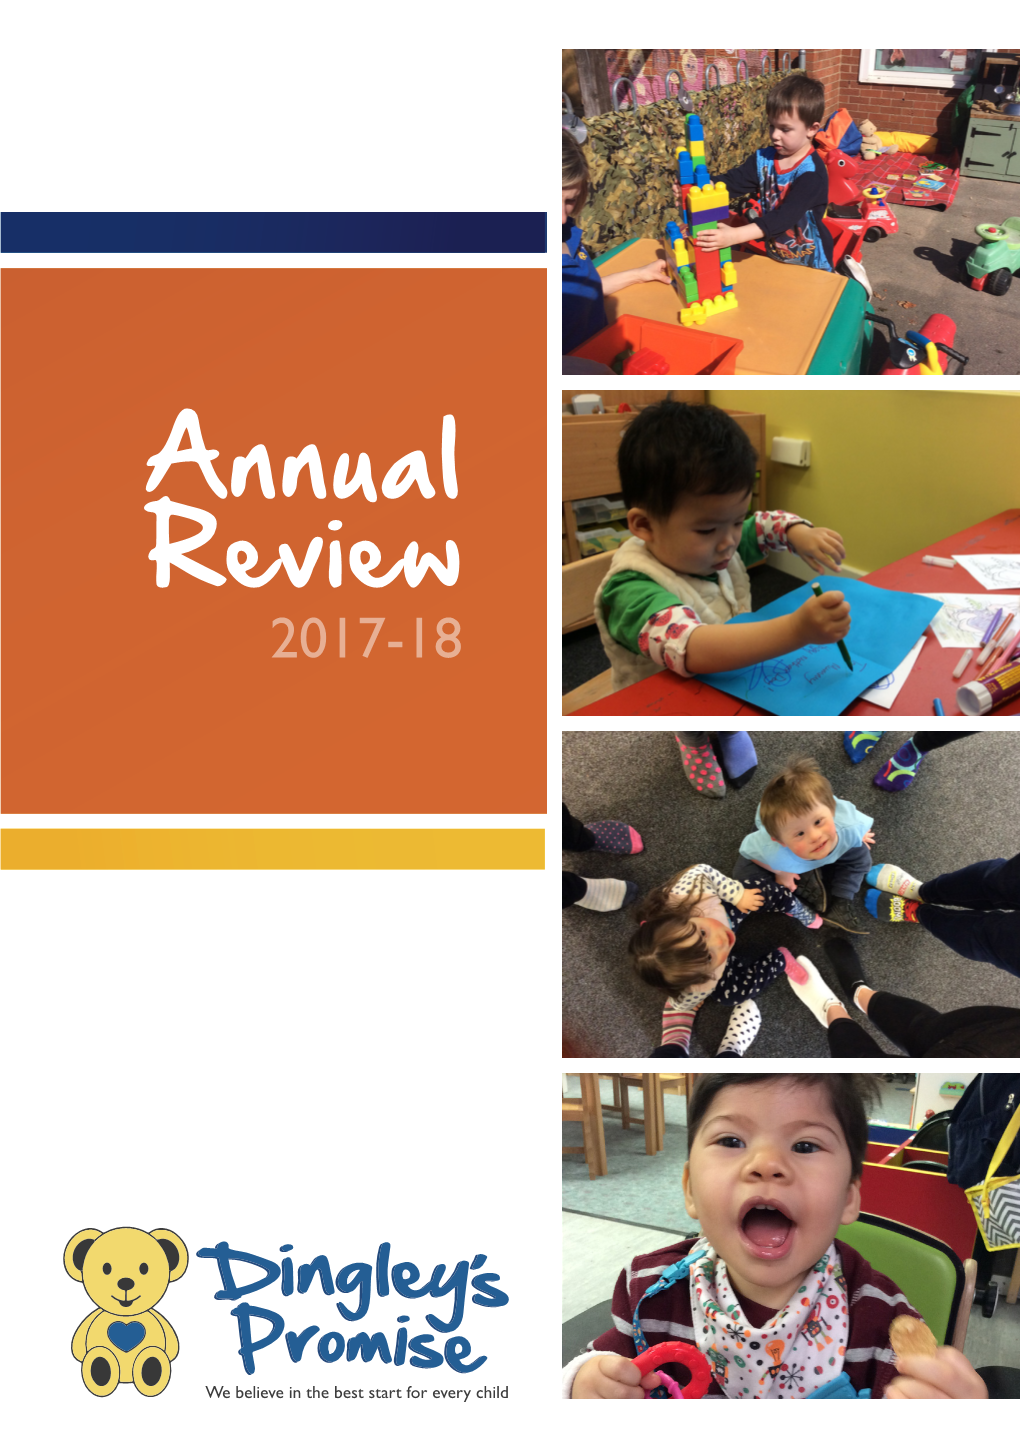 Annual Review 2017-18